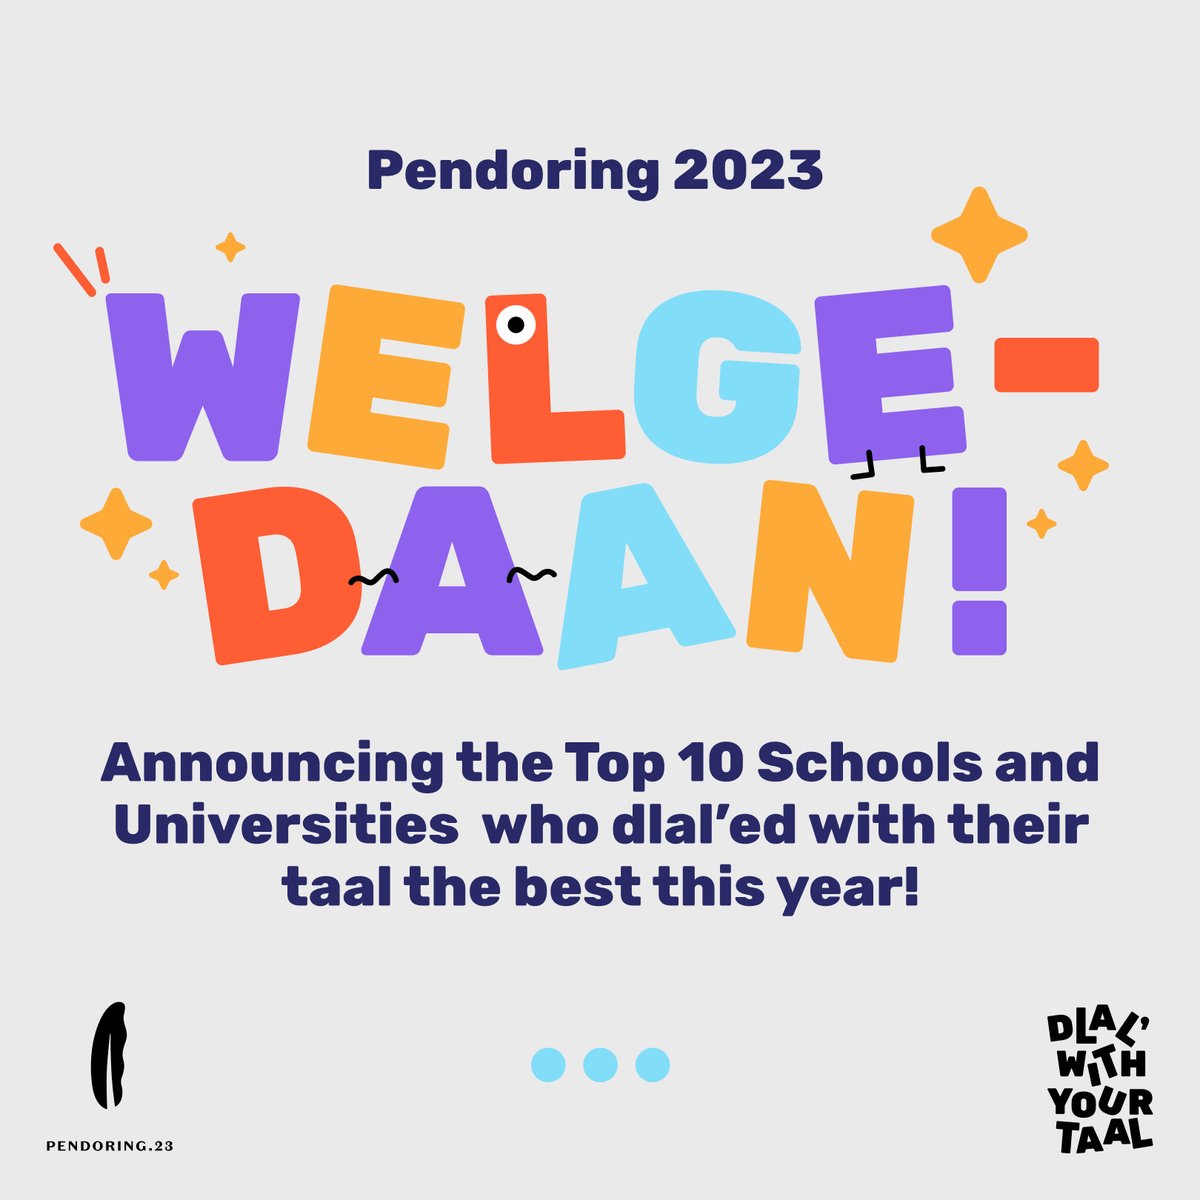 Congratulations to the Top 10 Schools and Universities of #Pendoring2023. 1. @RedAndYellowEd 2. @VegaSchool 3. @go2uj 4. @StellenboschUni 4. Cape Town Creative Academy You can order additional trophies or certificates before 8 December 2023 here: bit.ly/3t2i4B5